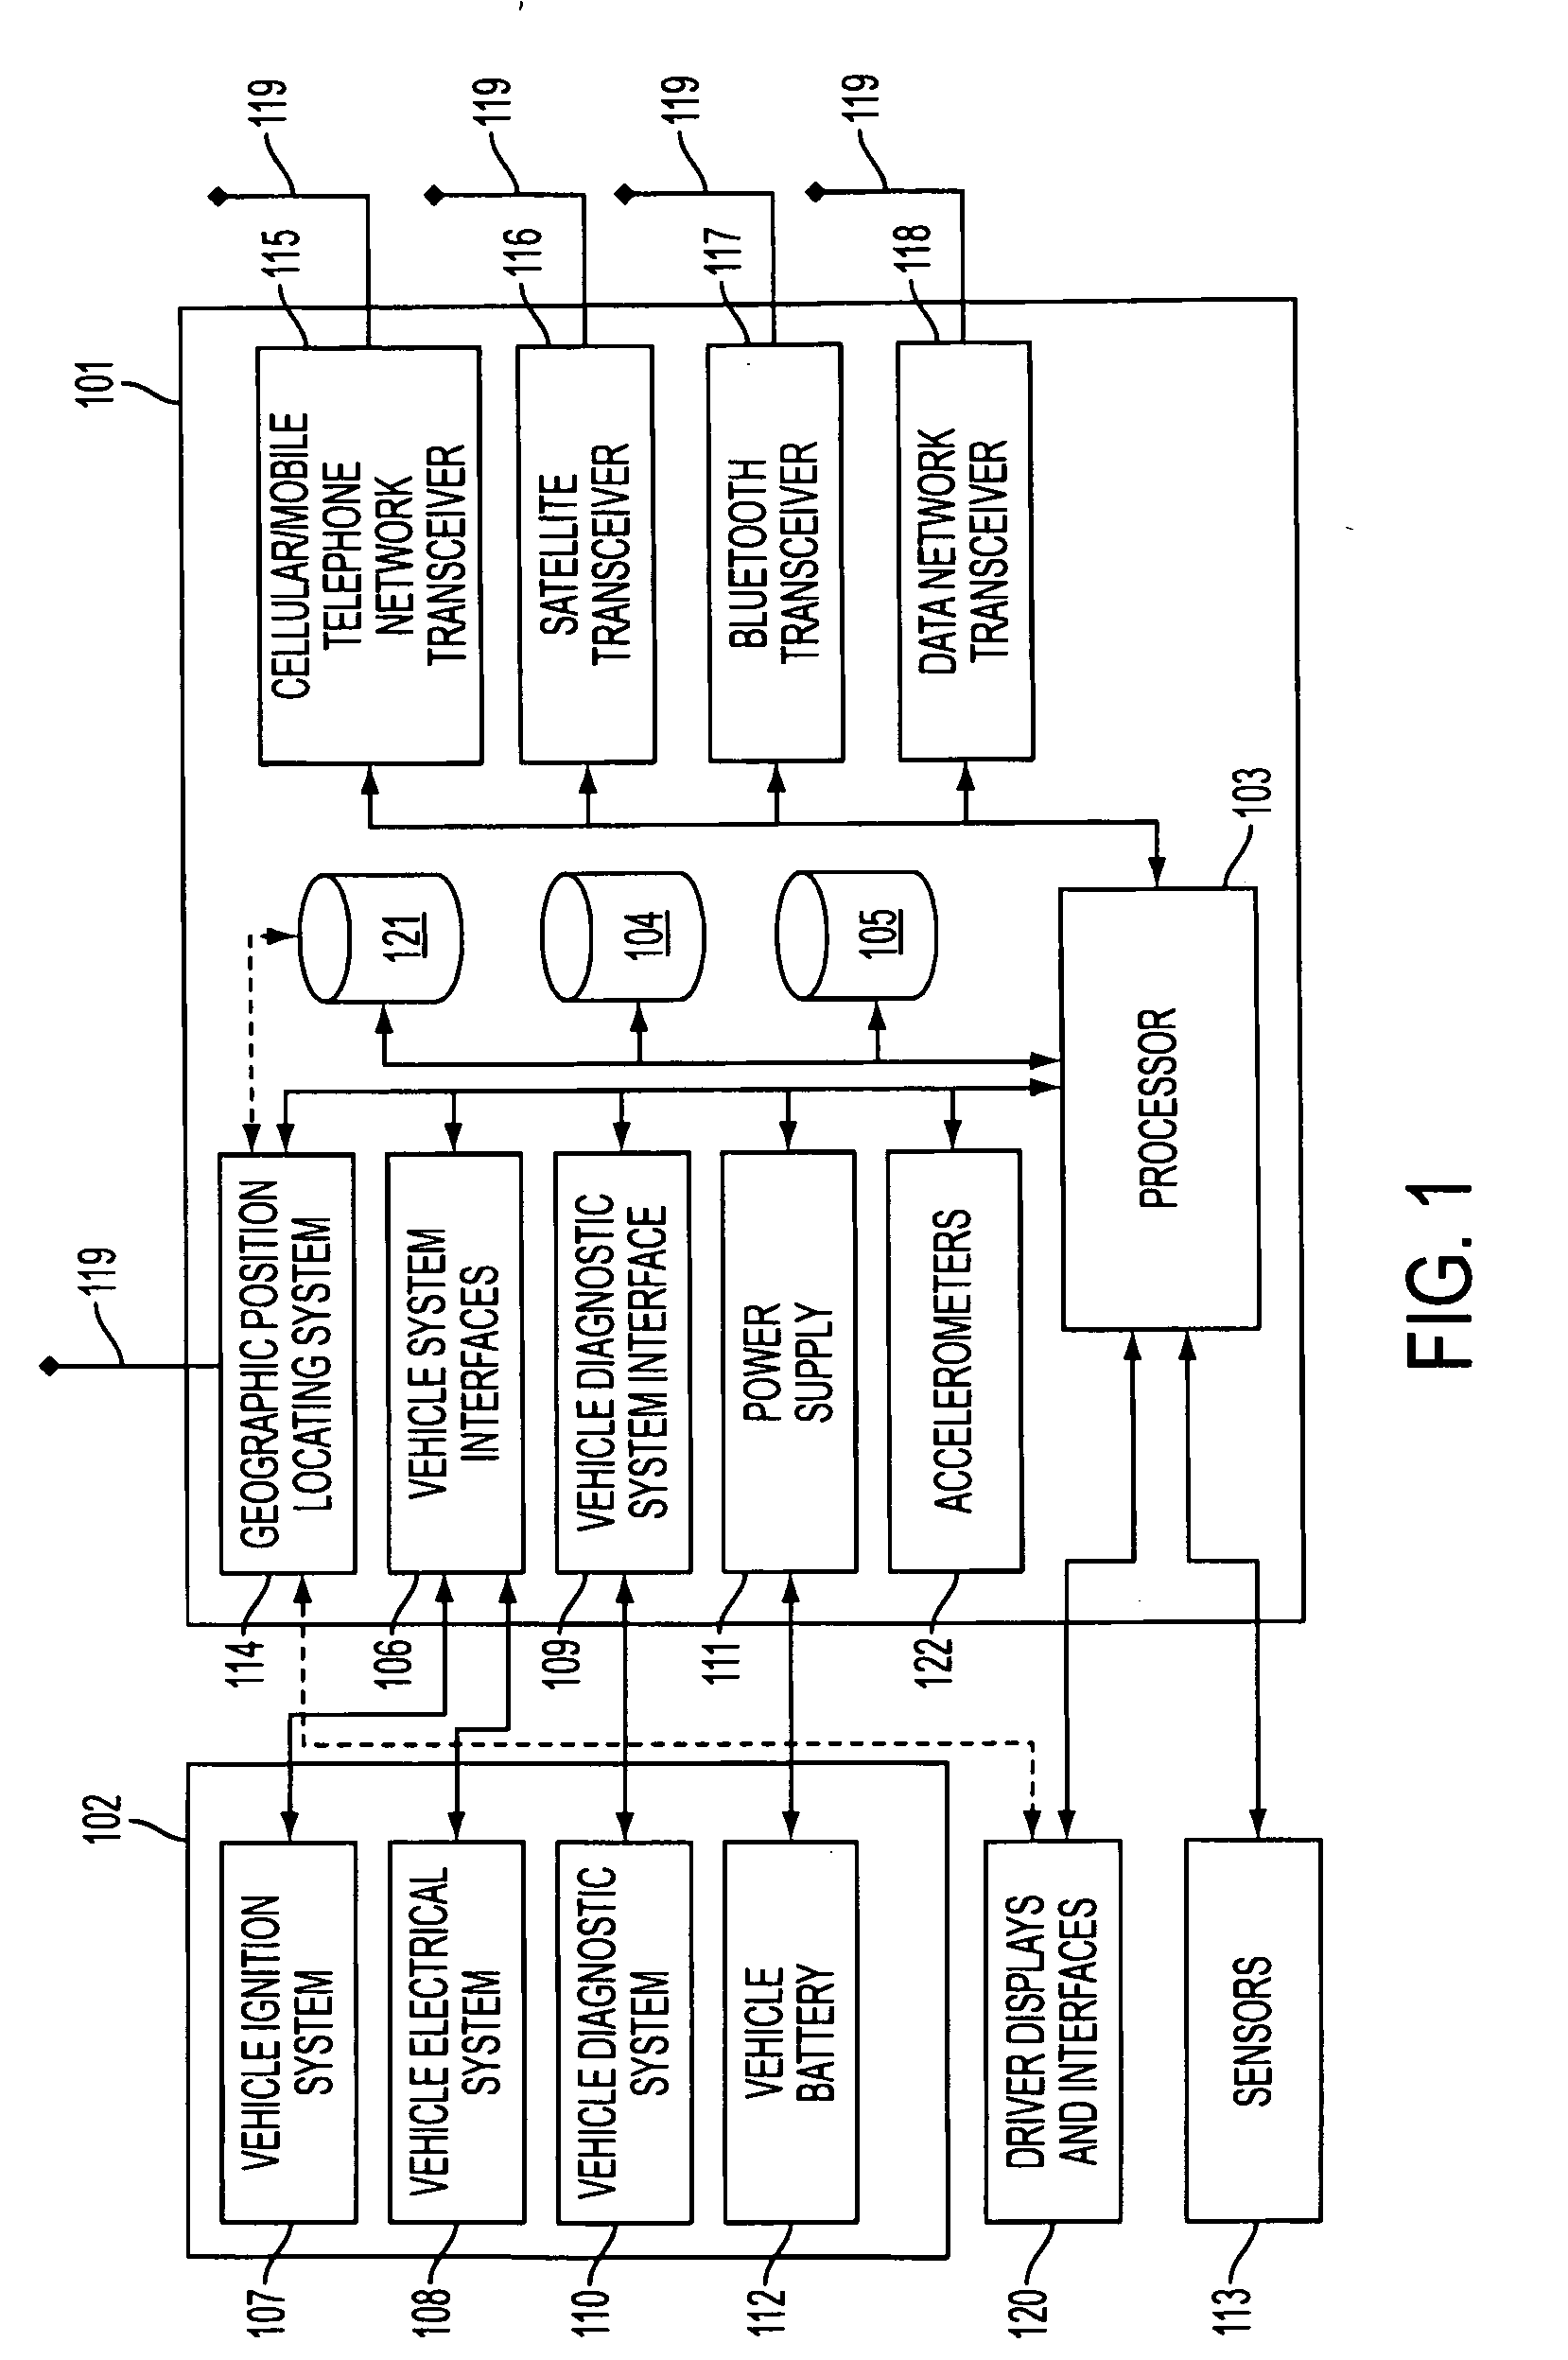 System and method for alerting drivers to road conditions